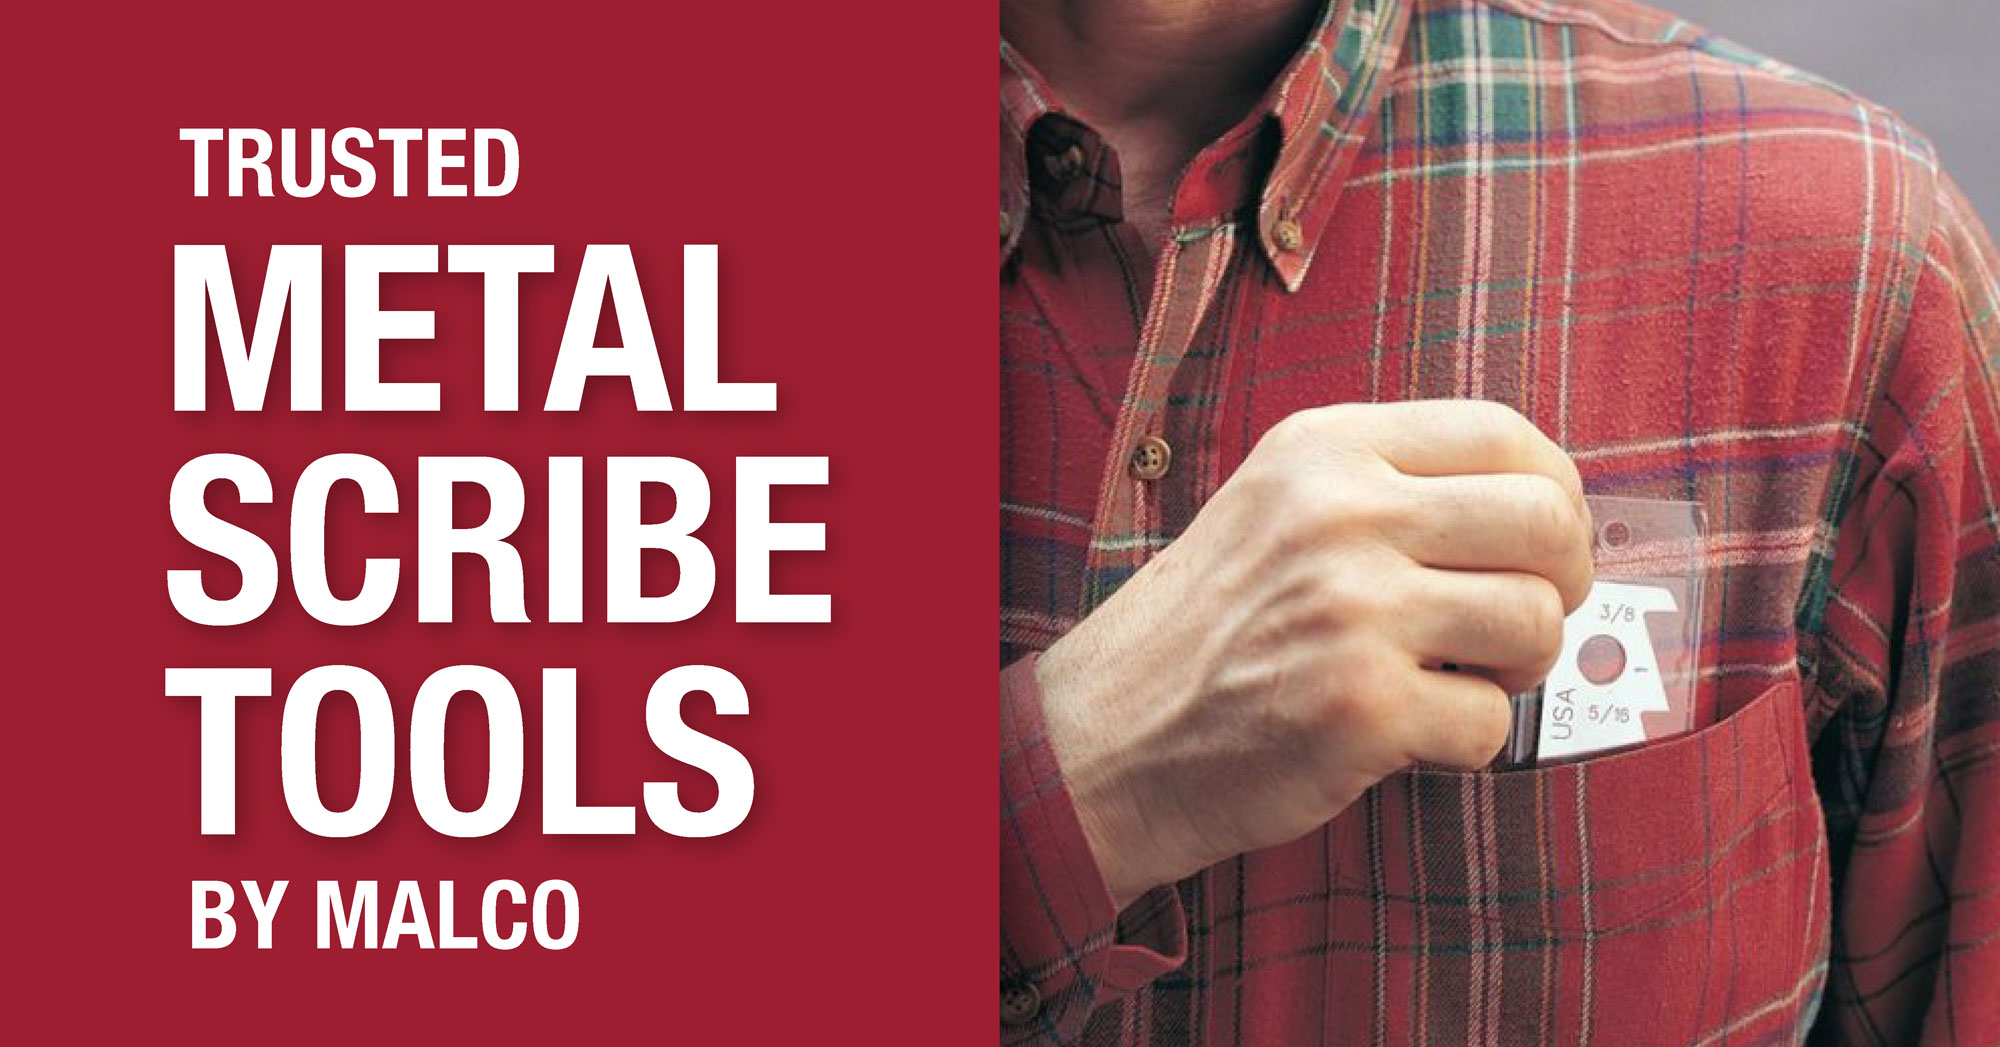 trusted metal scribe tools by malco